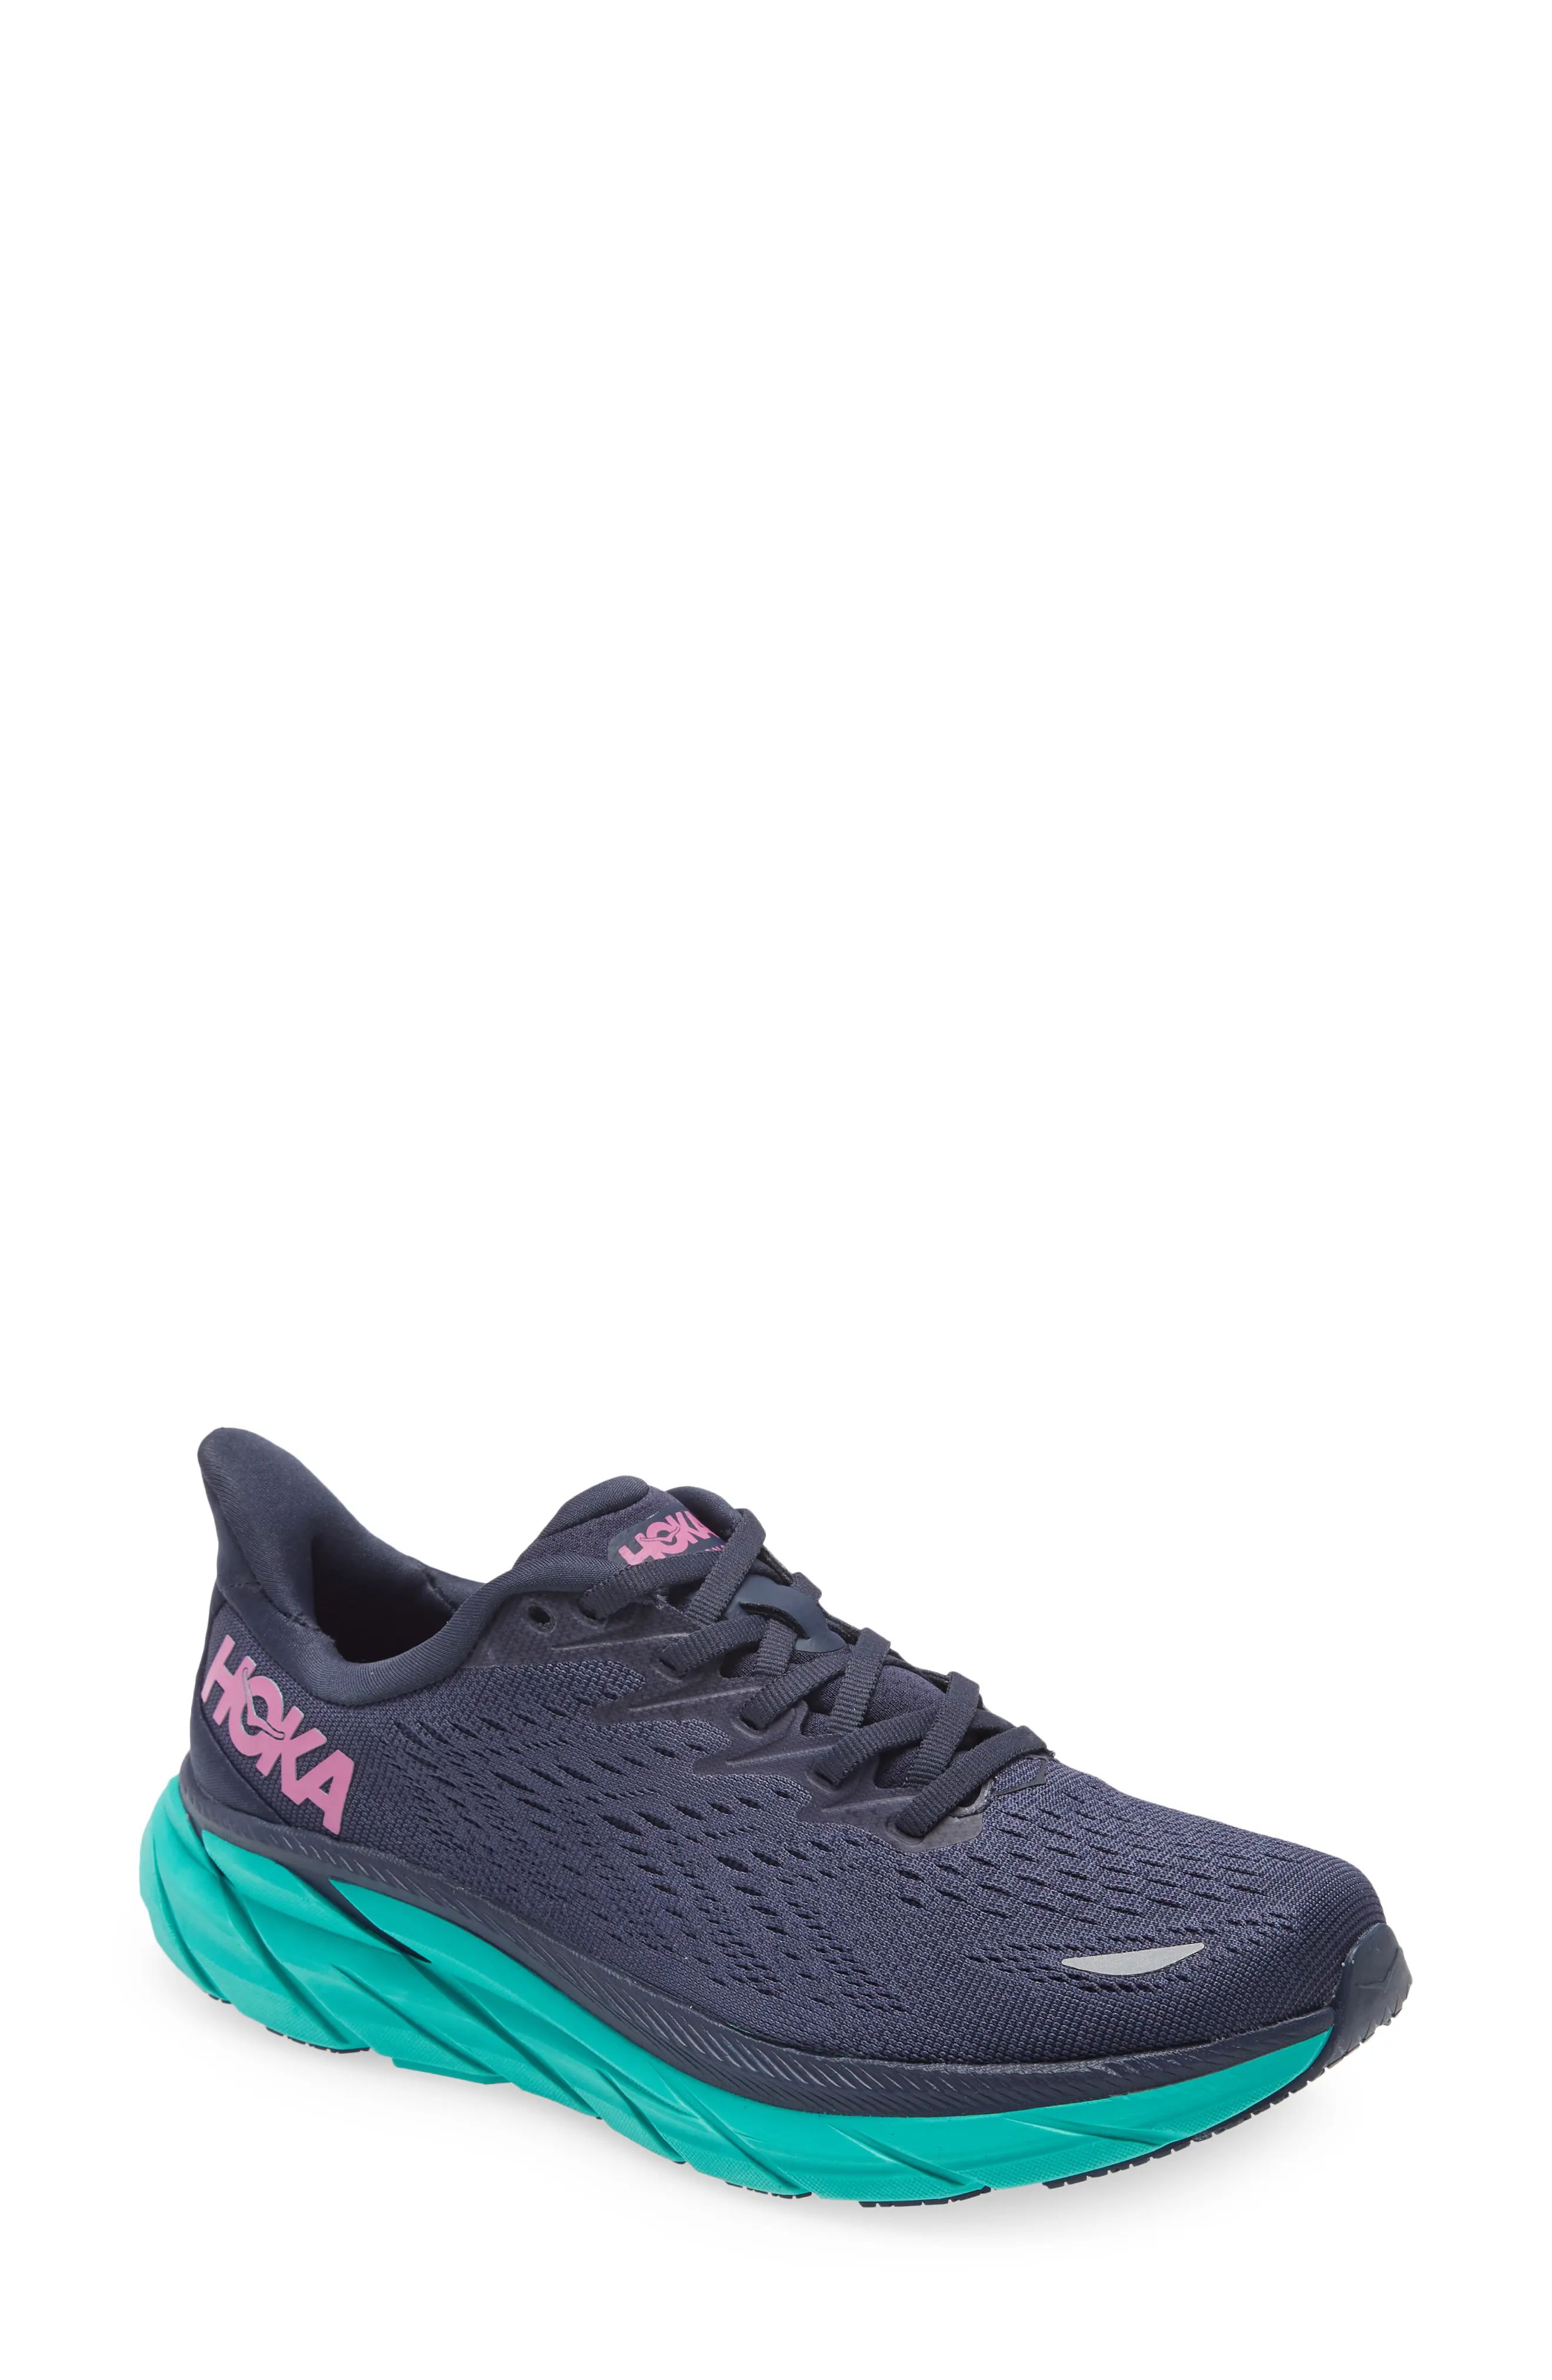 HOKA ONE ONE Clifton 8 Running Shoe in Outerspace/Atlantis at Nordstrom | Nordstrom